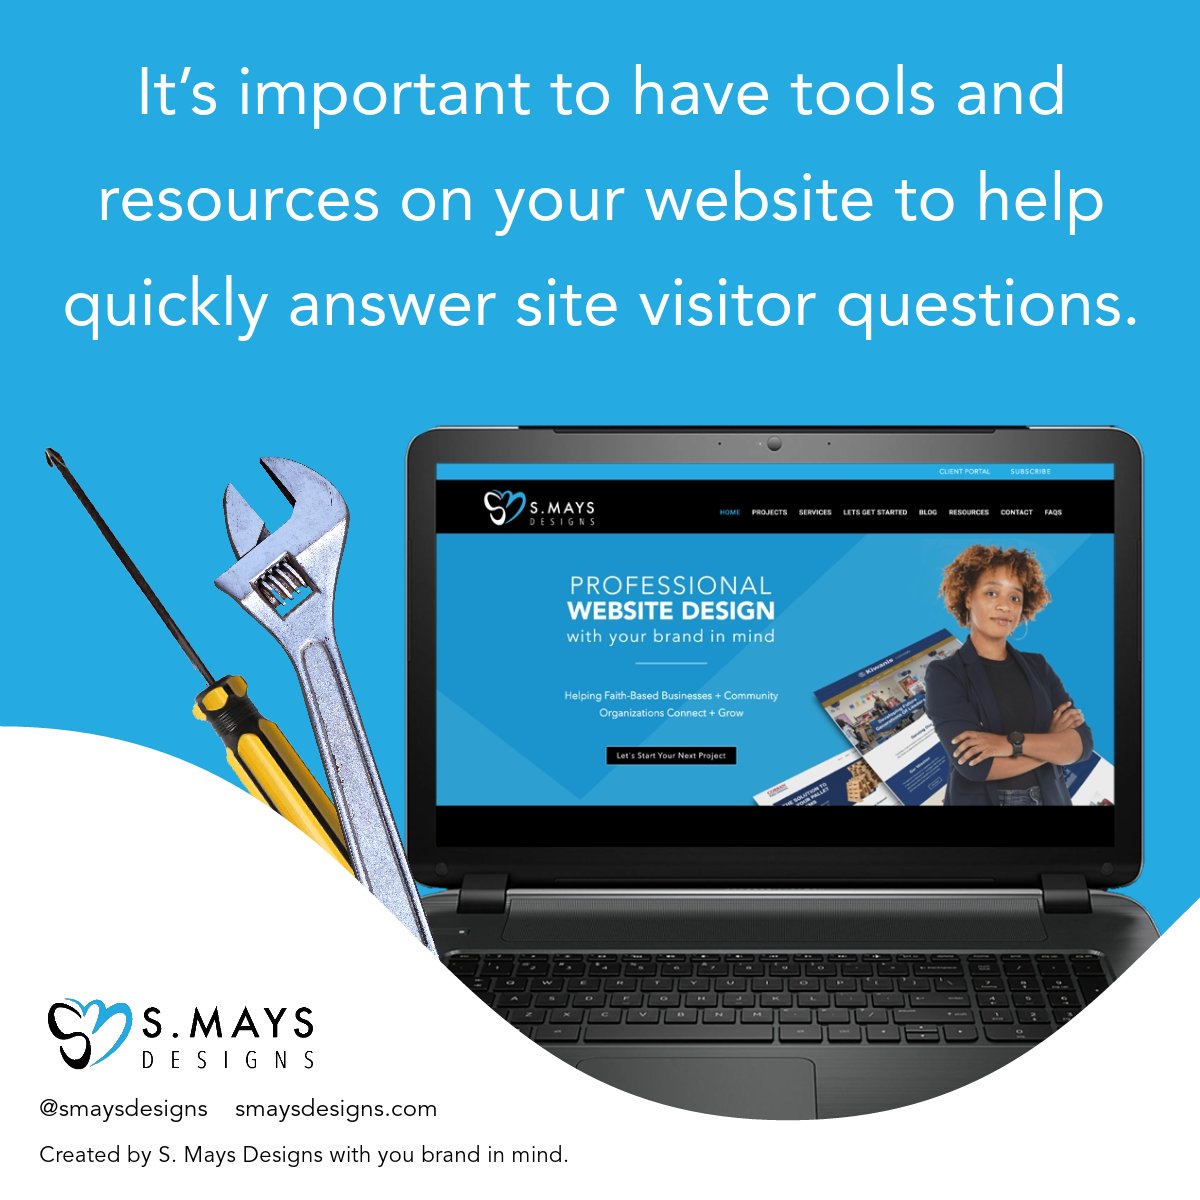 82% of people want companies to respond immediately to their sales and marketing questions. Having an FAQ page, live chat and chat bots are ways to satisfy your website visitor’s need for speedy responses to their questions. 

#smaysdesigns #webtools #websitedesign #webfacts